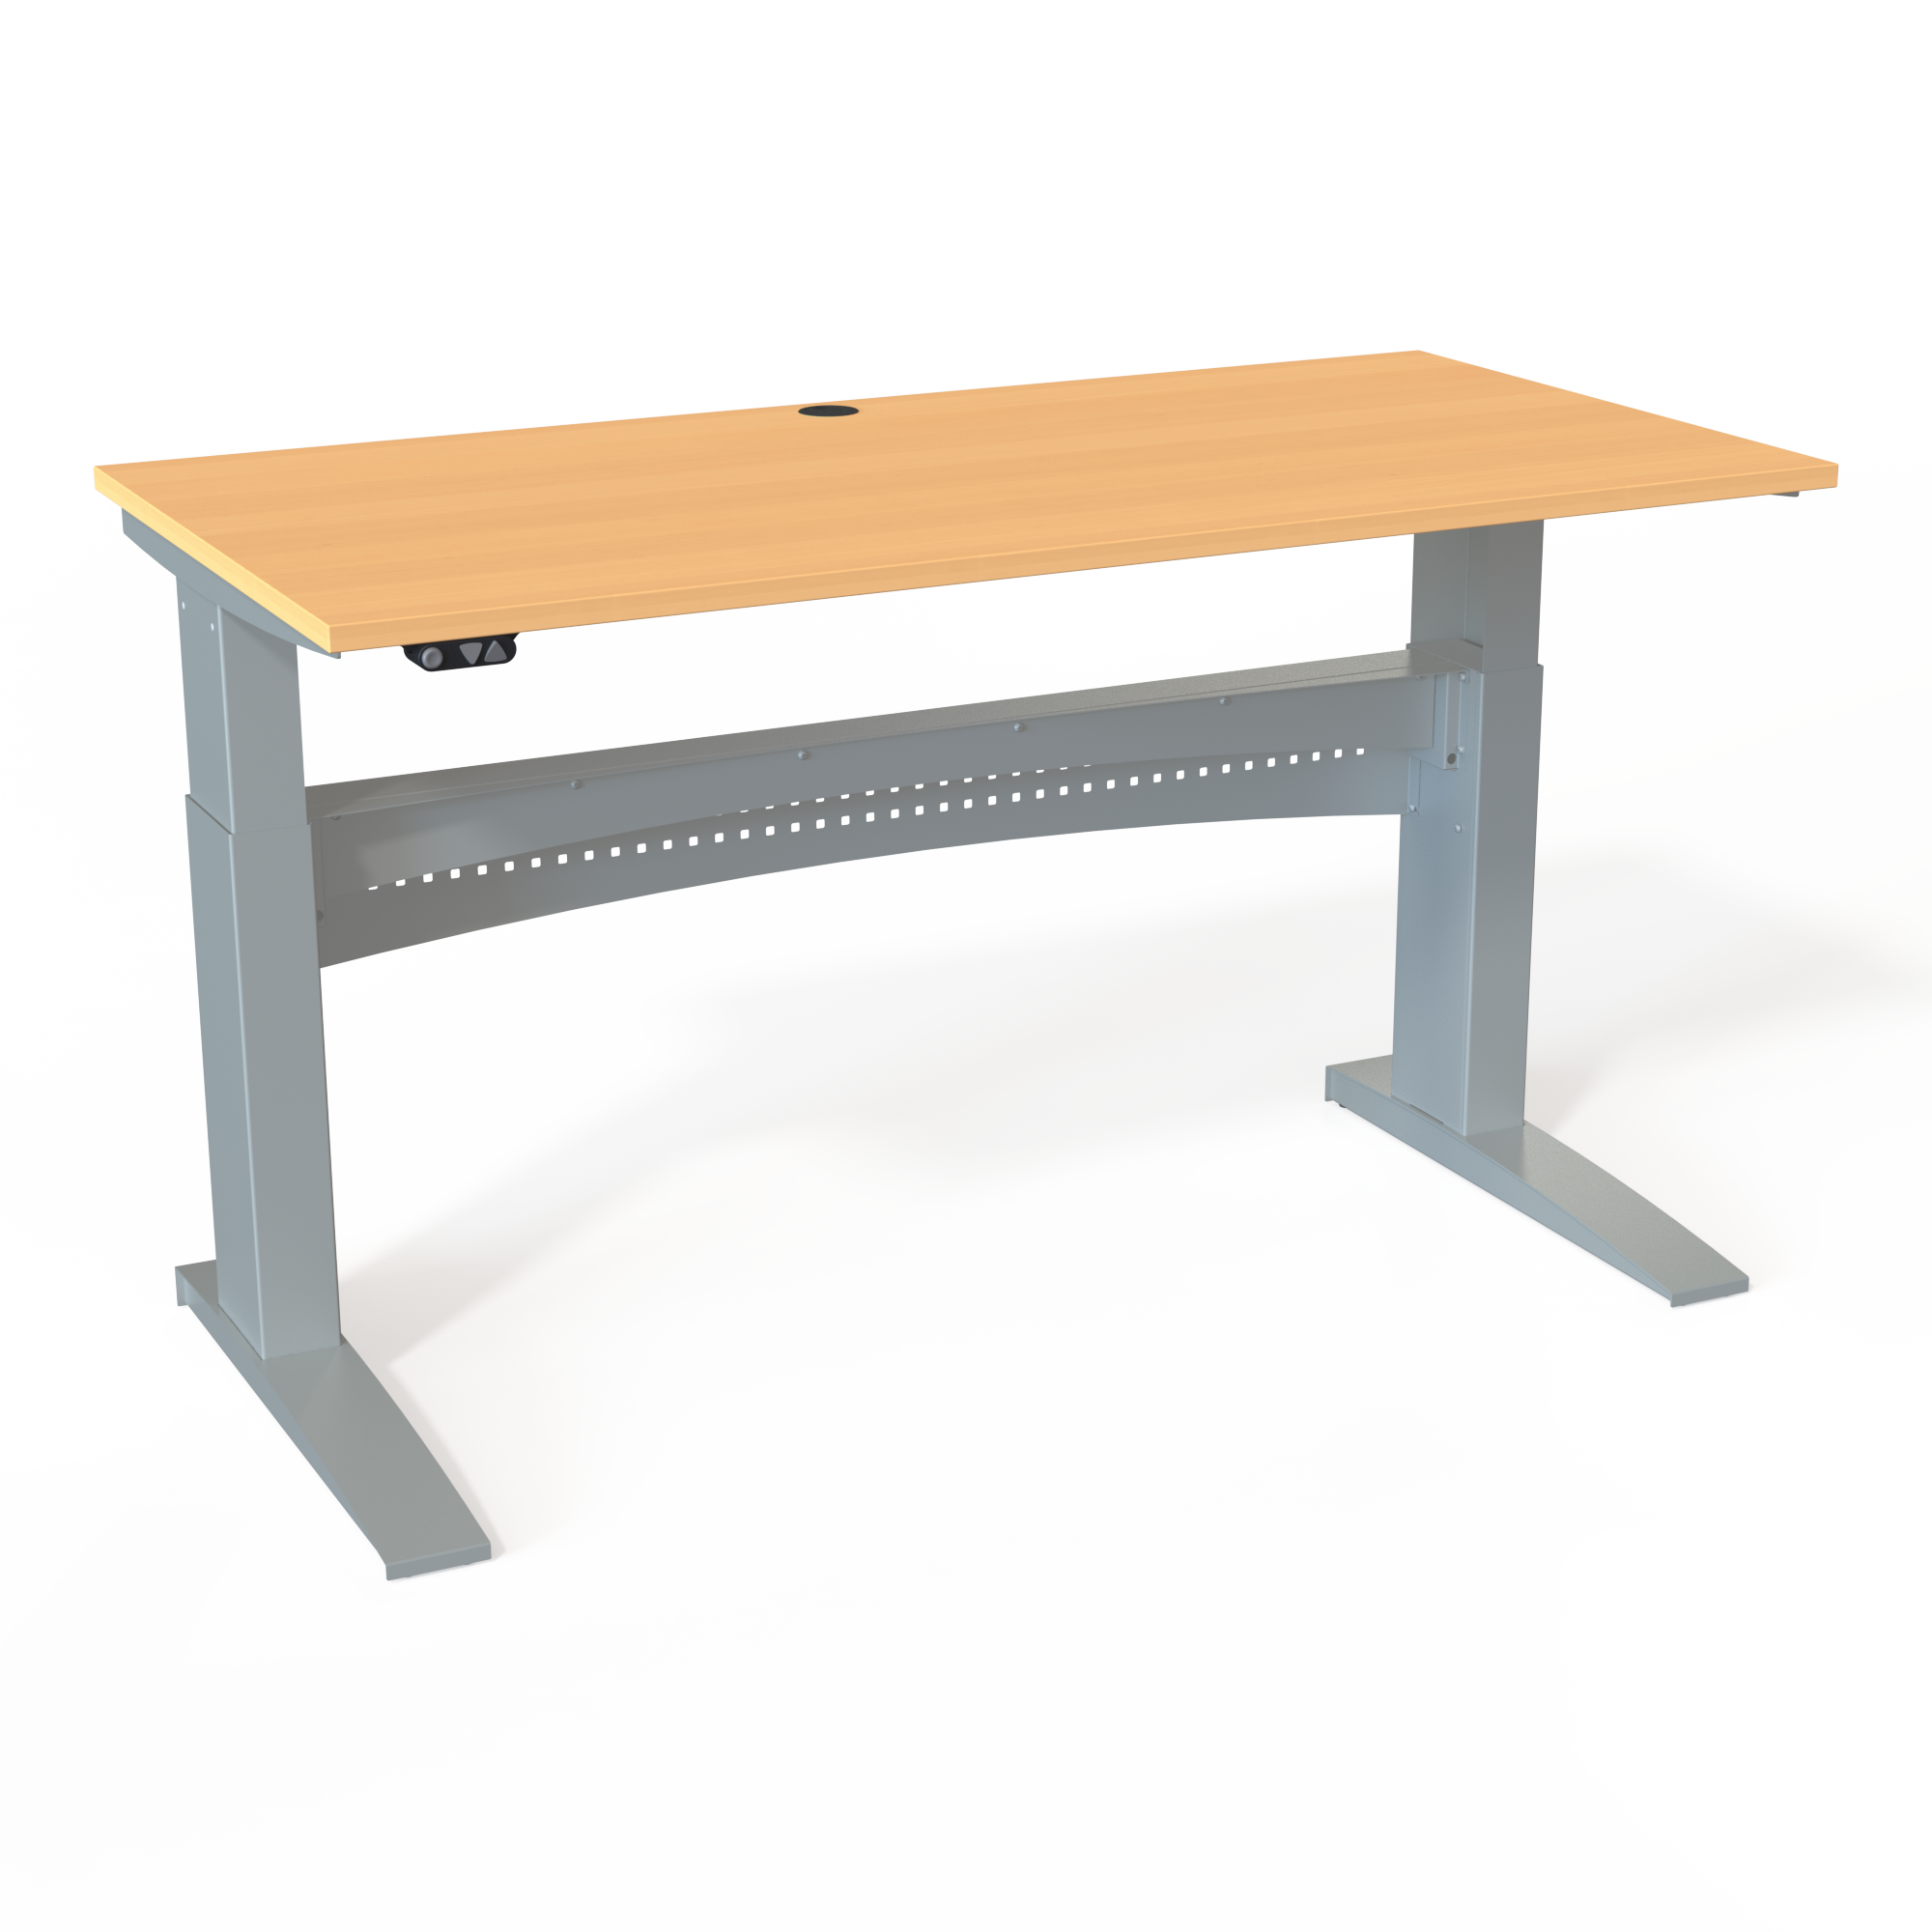 Electric Adjustable Desk | 160x80 cm | Beech with silver frame